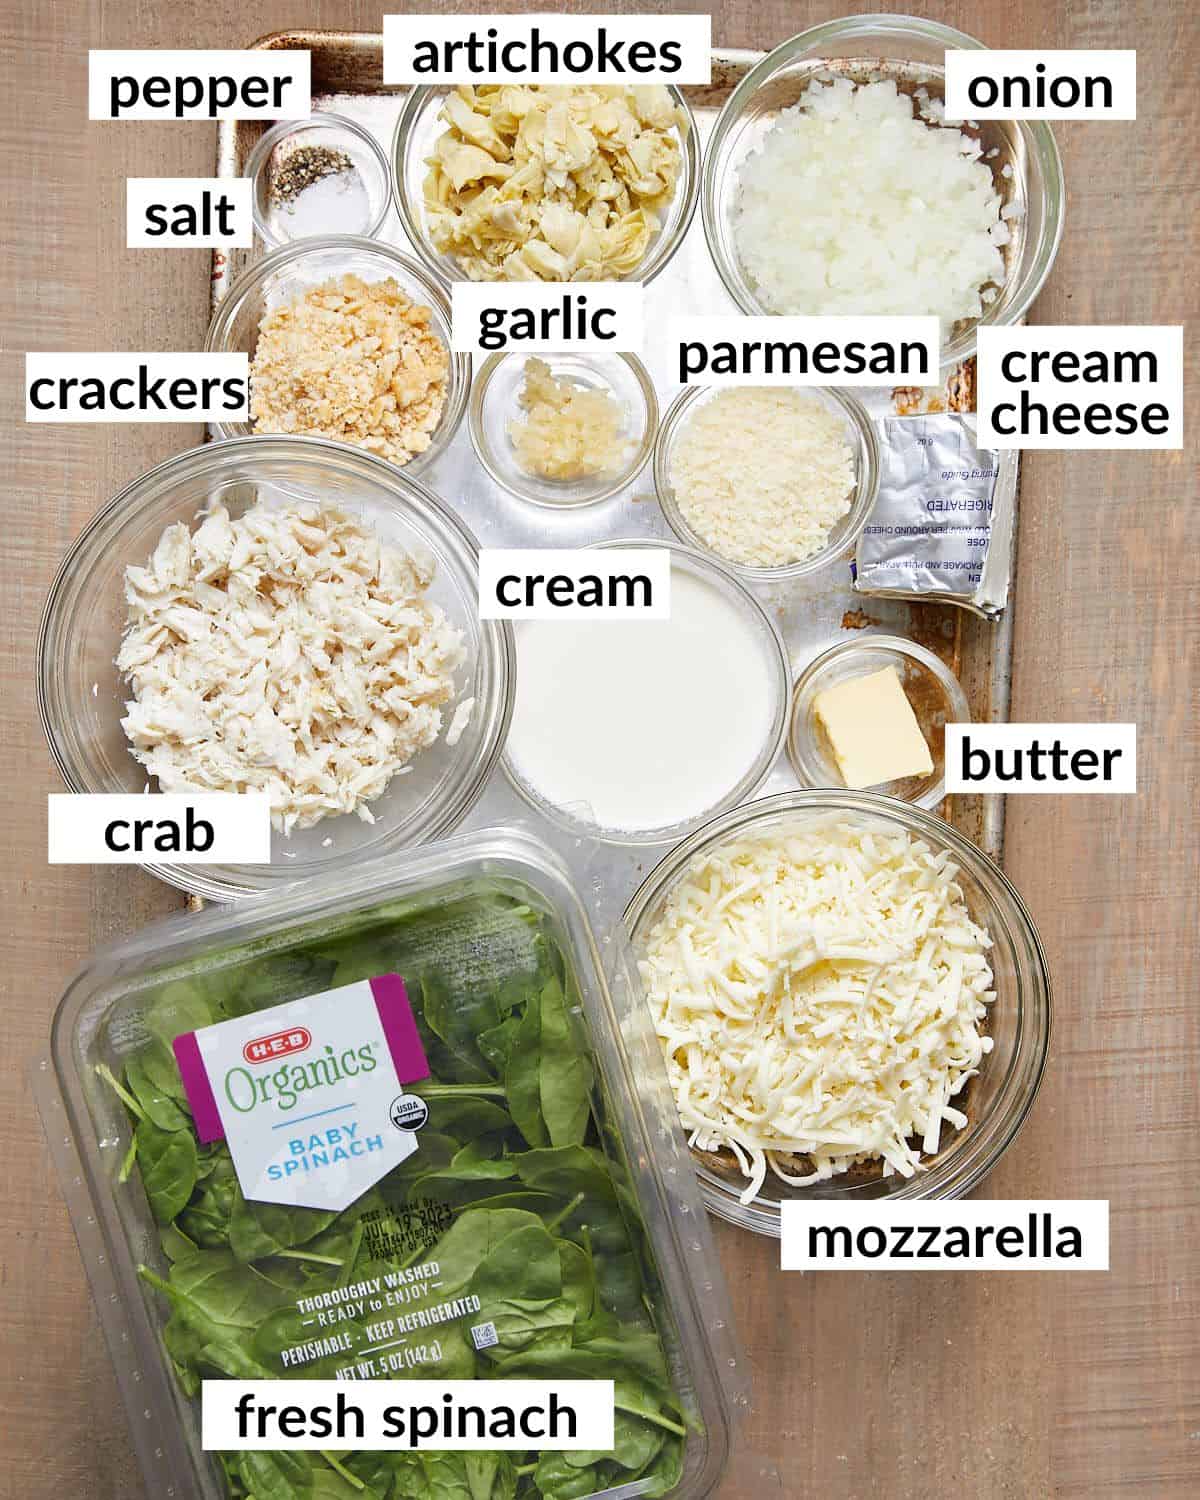 Overhead image of ingredients needed to make crab spinach artichoke dip.